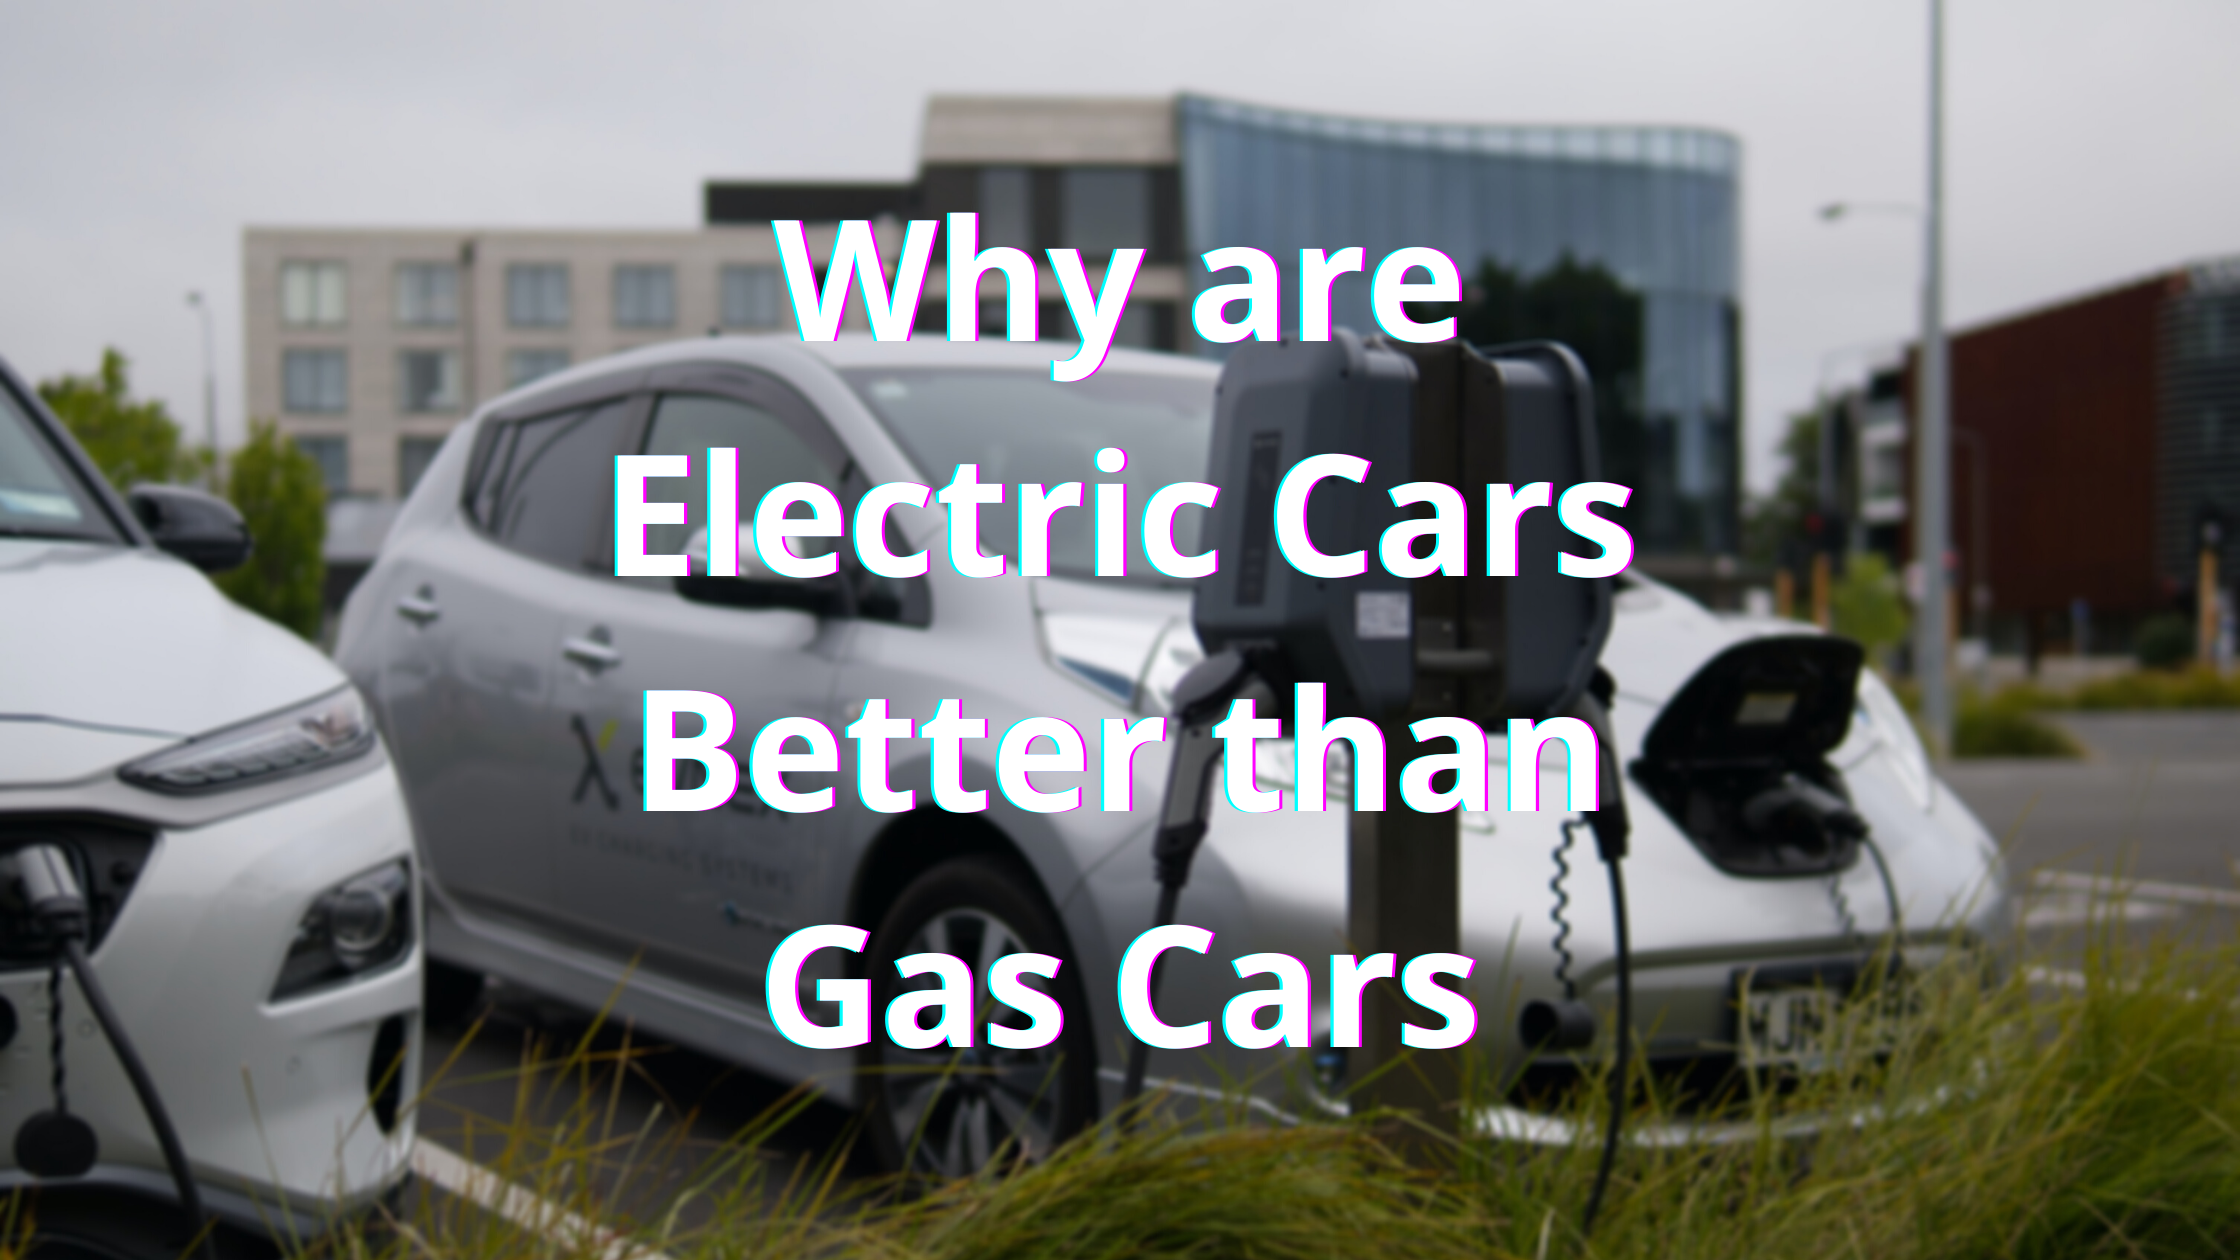 Why are Electric Cars Better than Gas Cars?